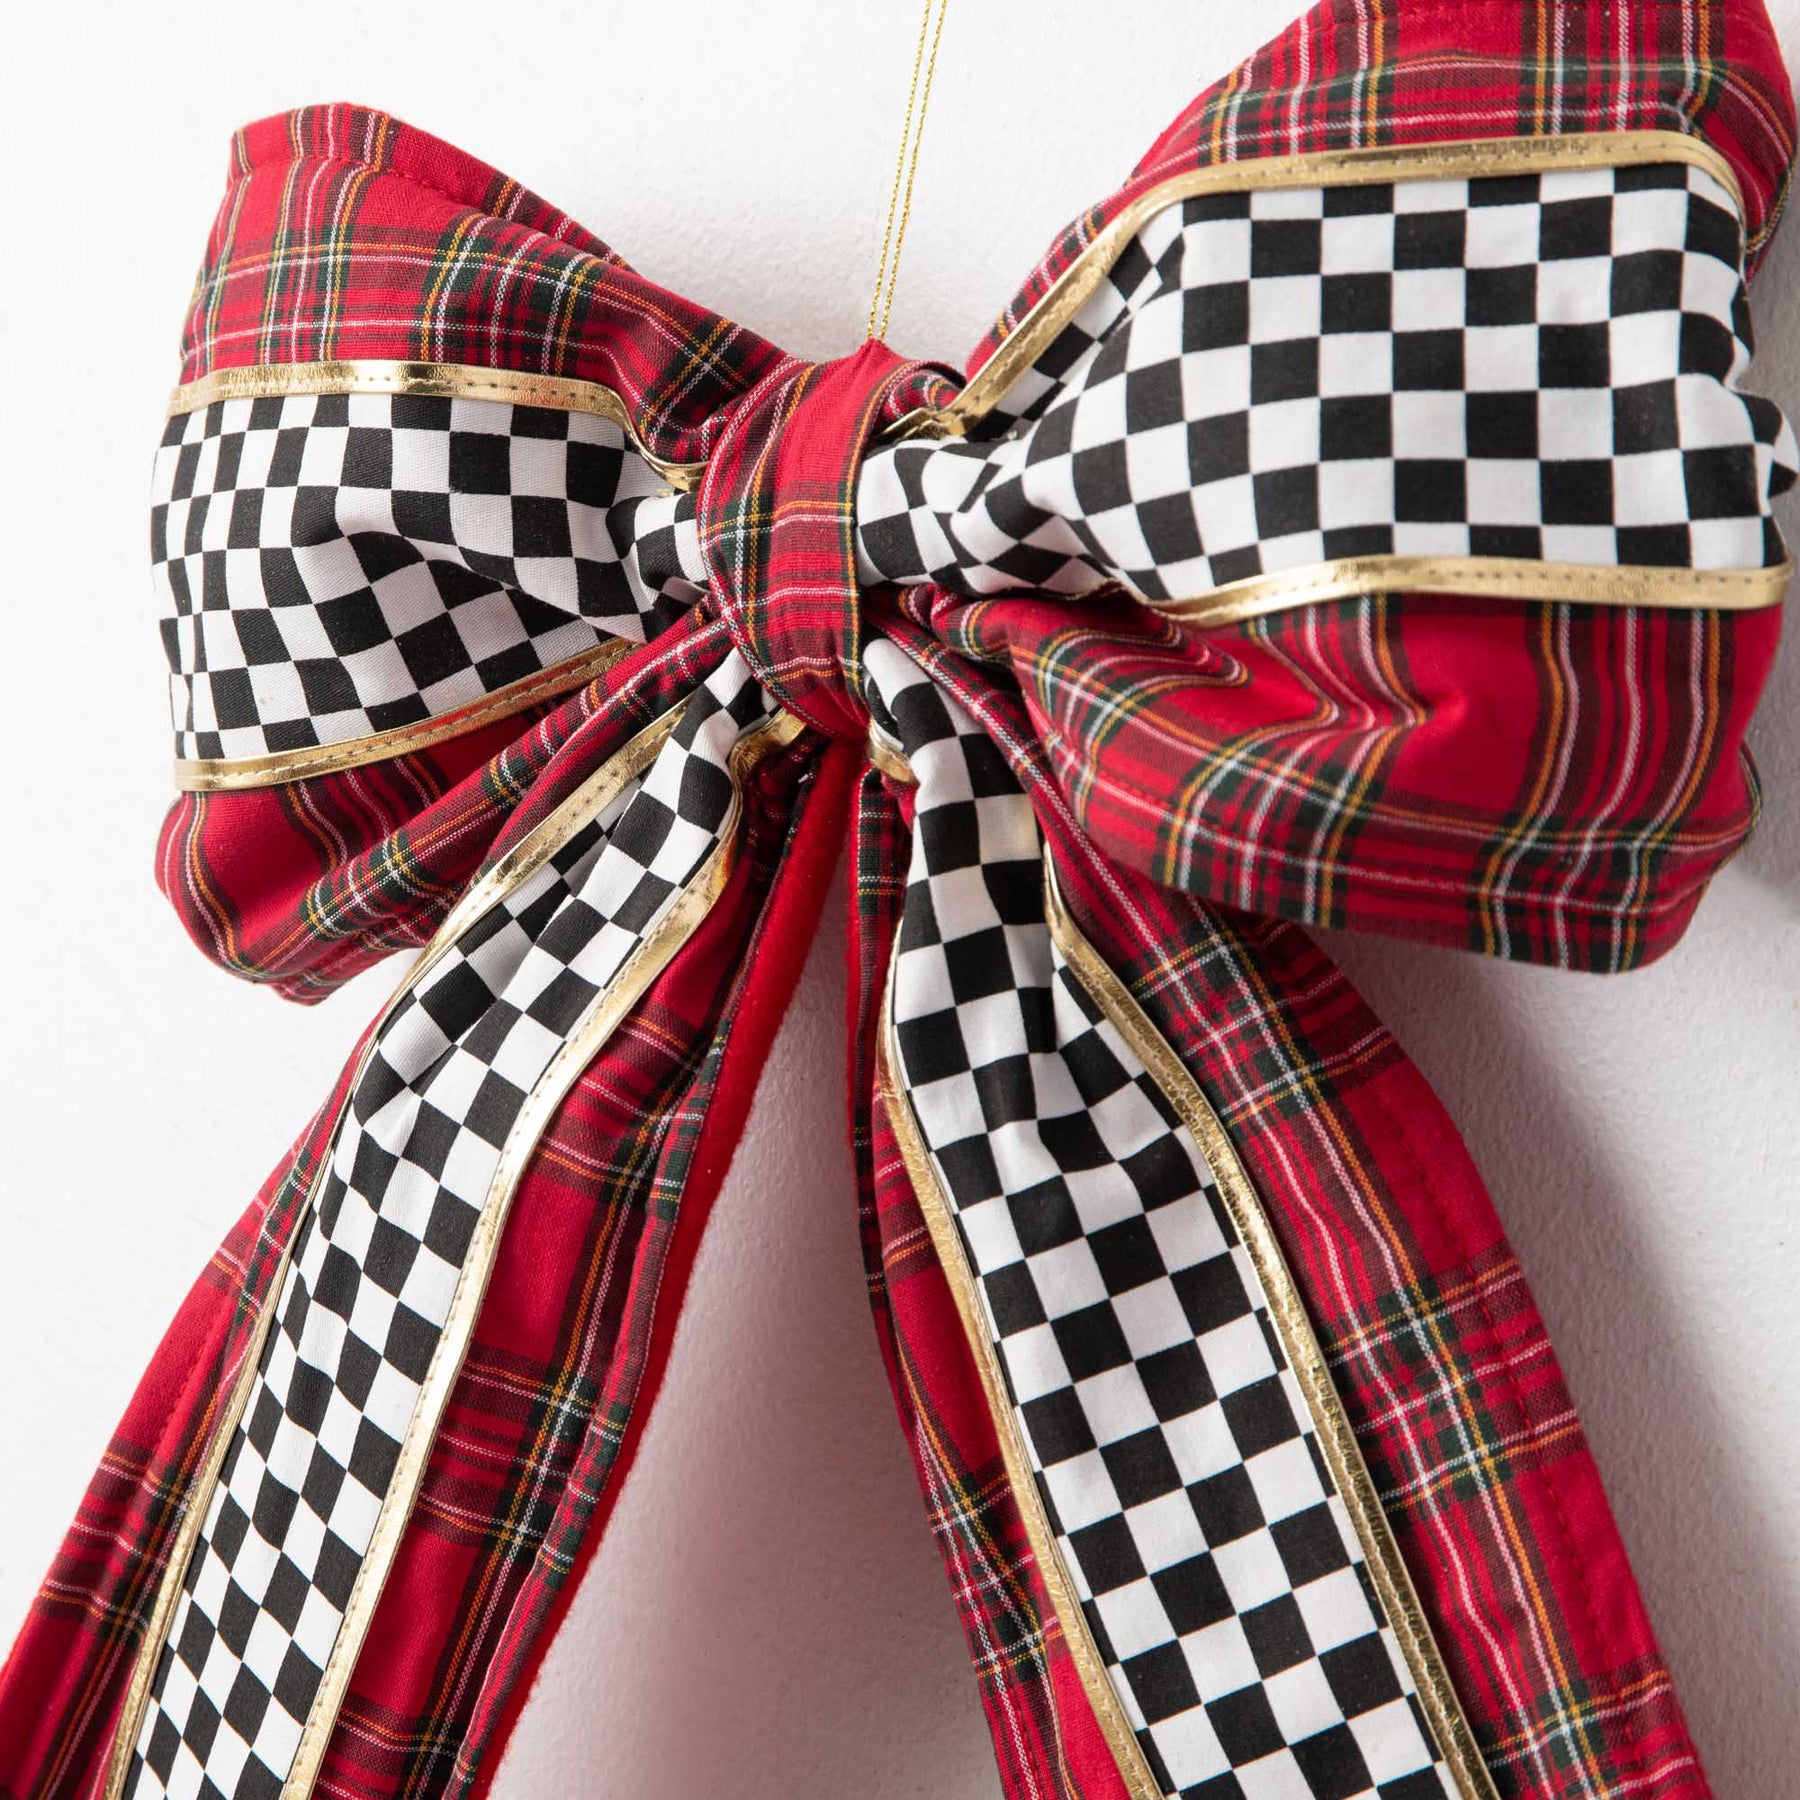 Slim Tartan Plaid Christmas Ribbon, Thin Checkered Trim in Red and Black,  Unique Ribbon for Bows and Decorations, Seasonal Wreaths 